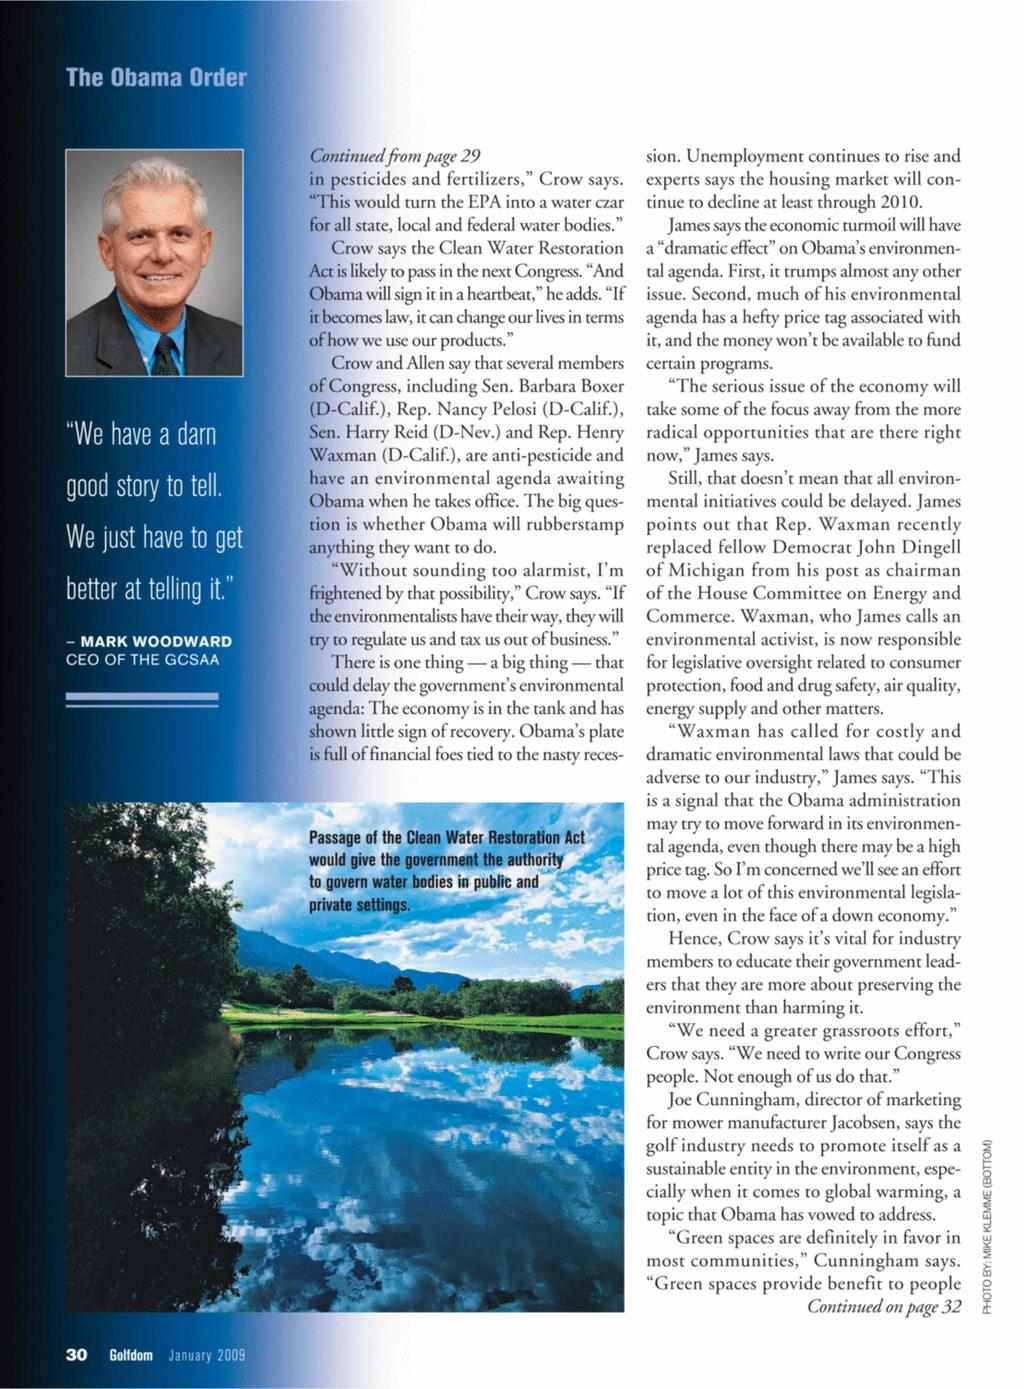 "We have a darn good story to tell. We just have to get better at telling it." - MARK WOODWARD CEO OF THE GCSAA Continued from page 29 in pcsticides and fertilizers," Crow says.